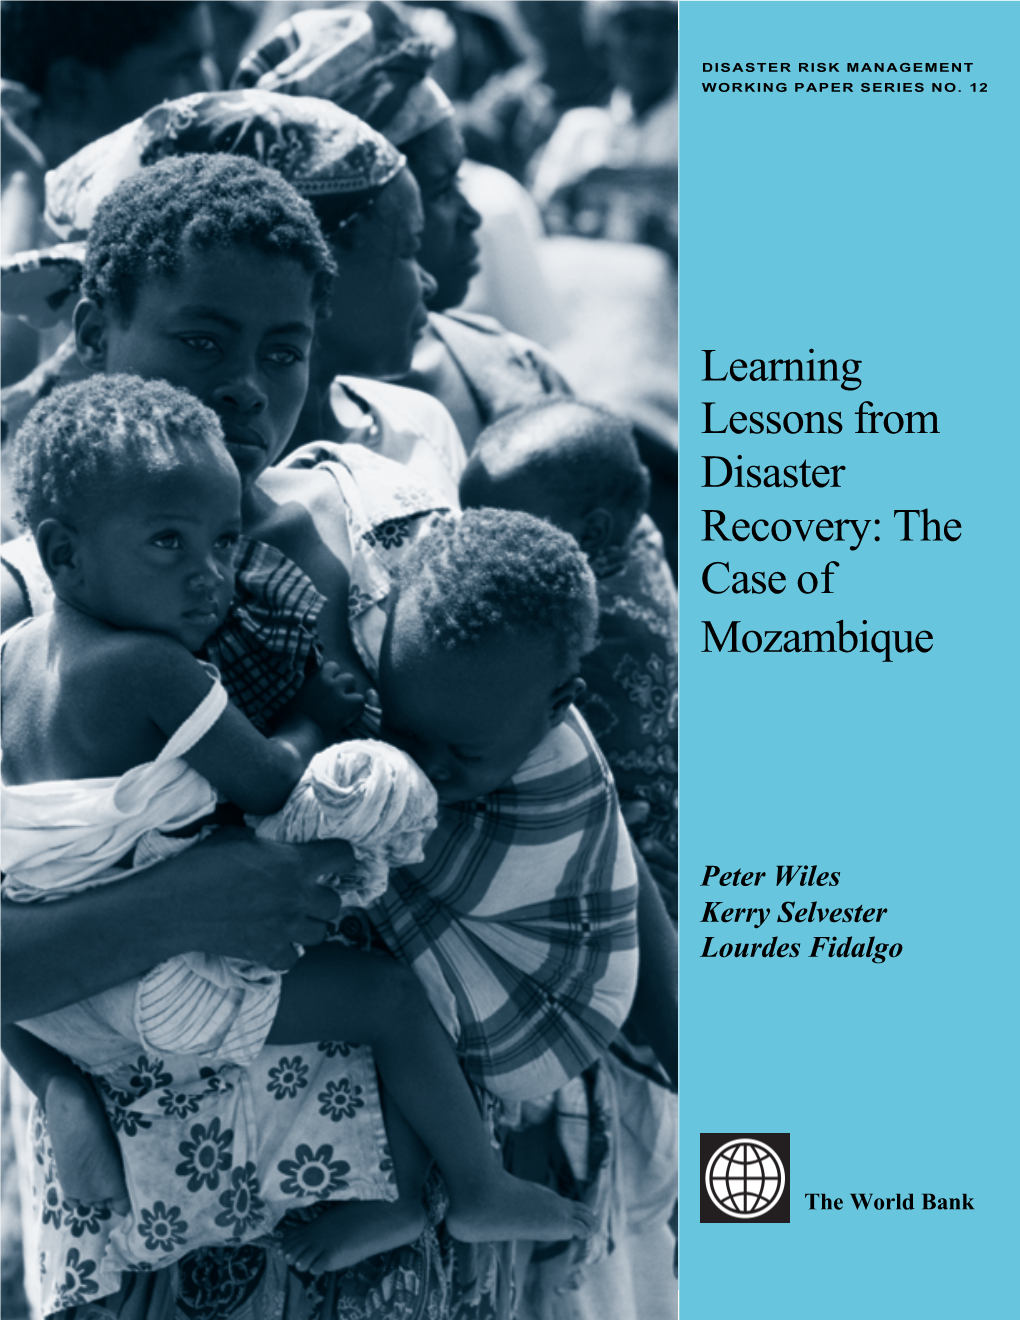 Learning Lessons from Disaster Recovery: the Case of Mozambique